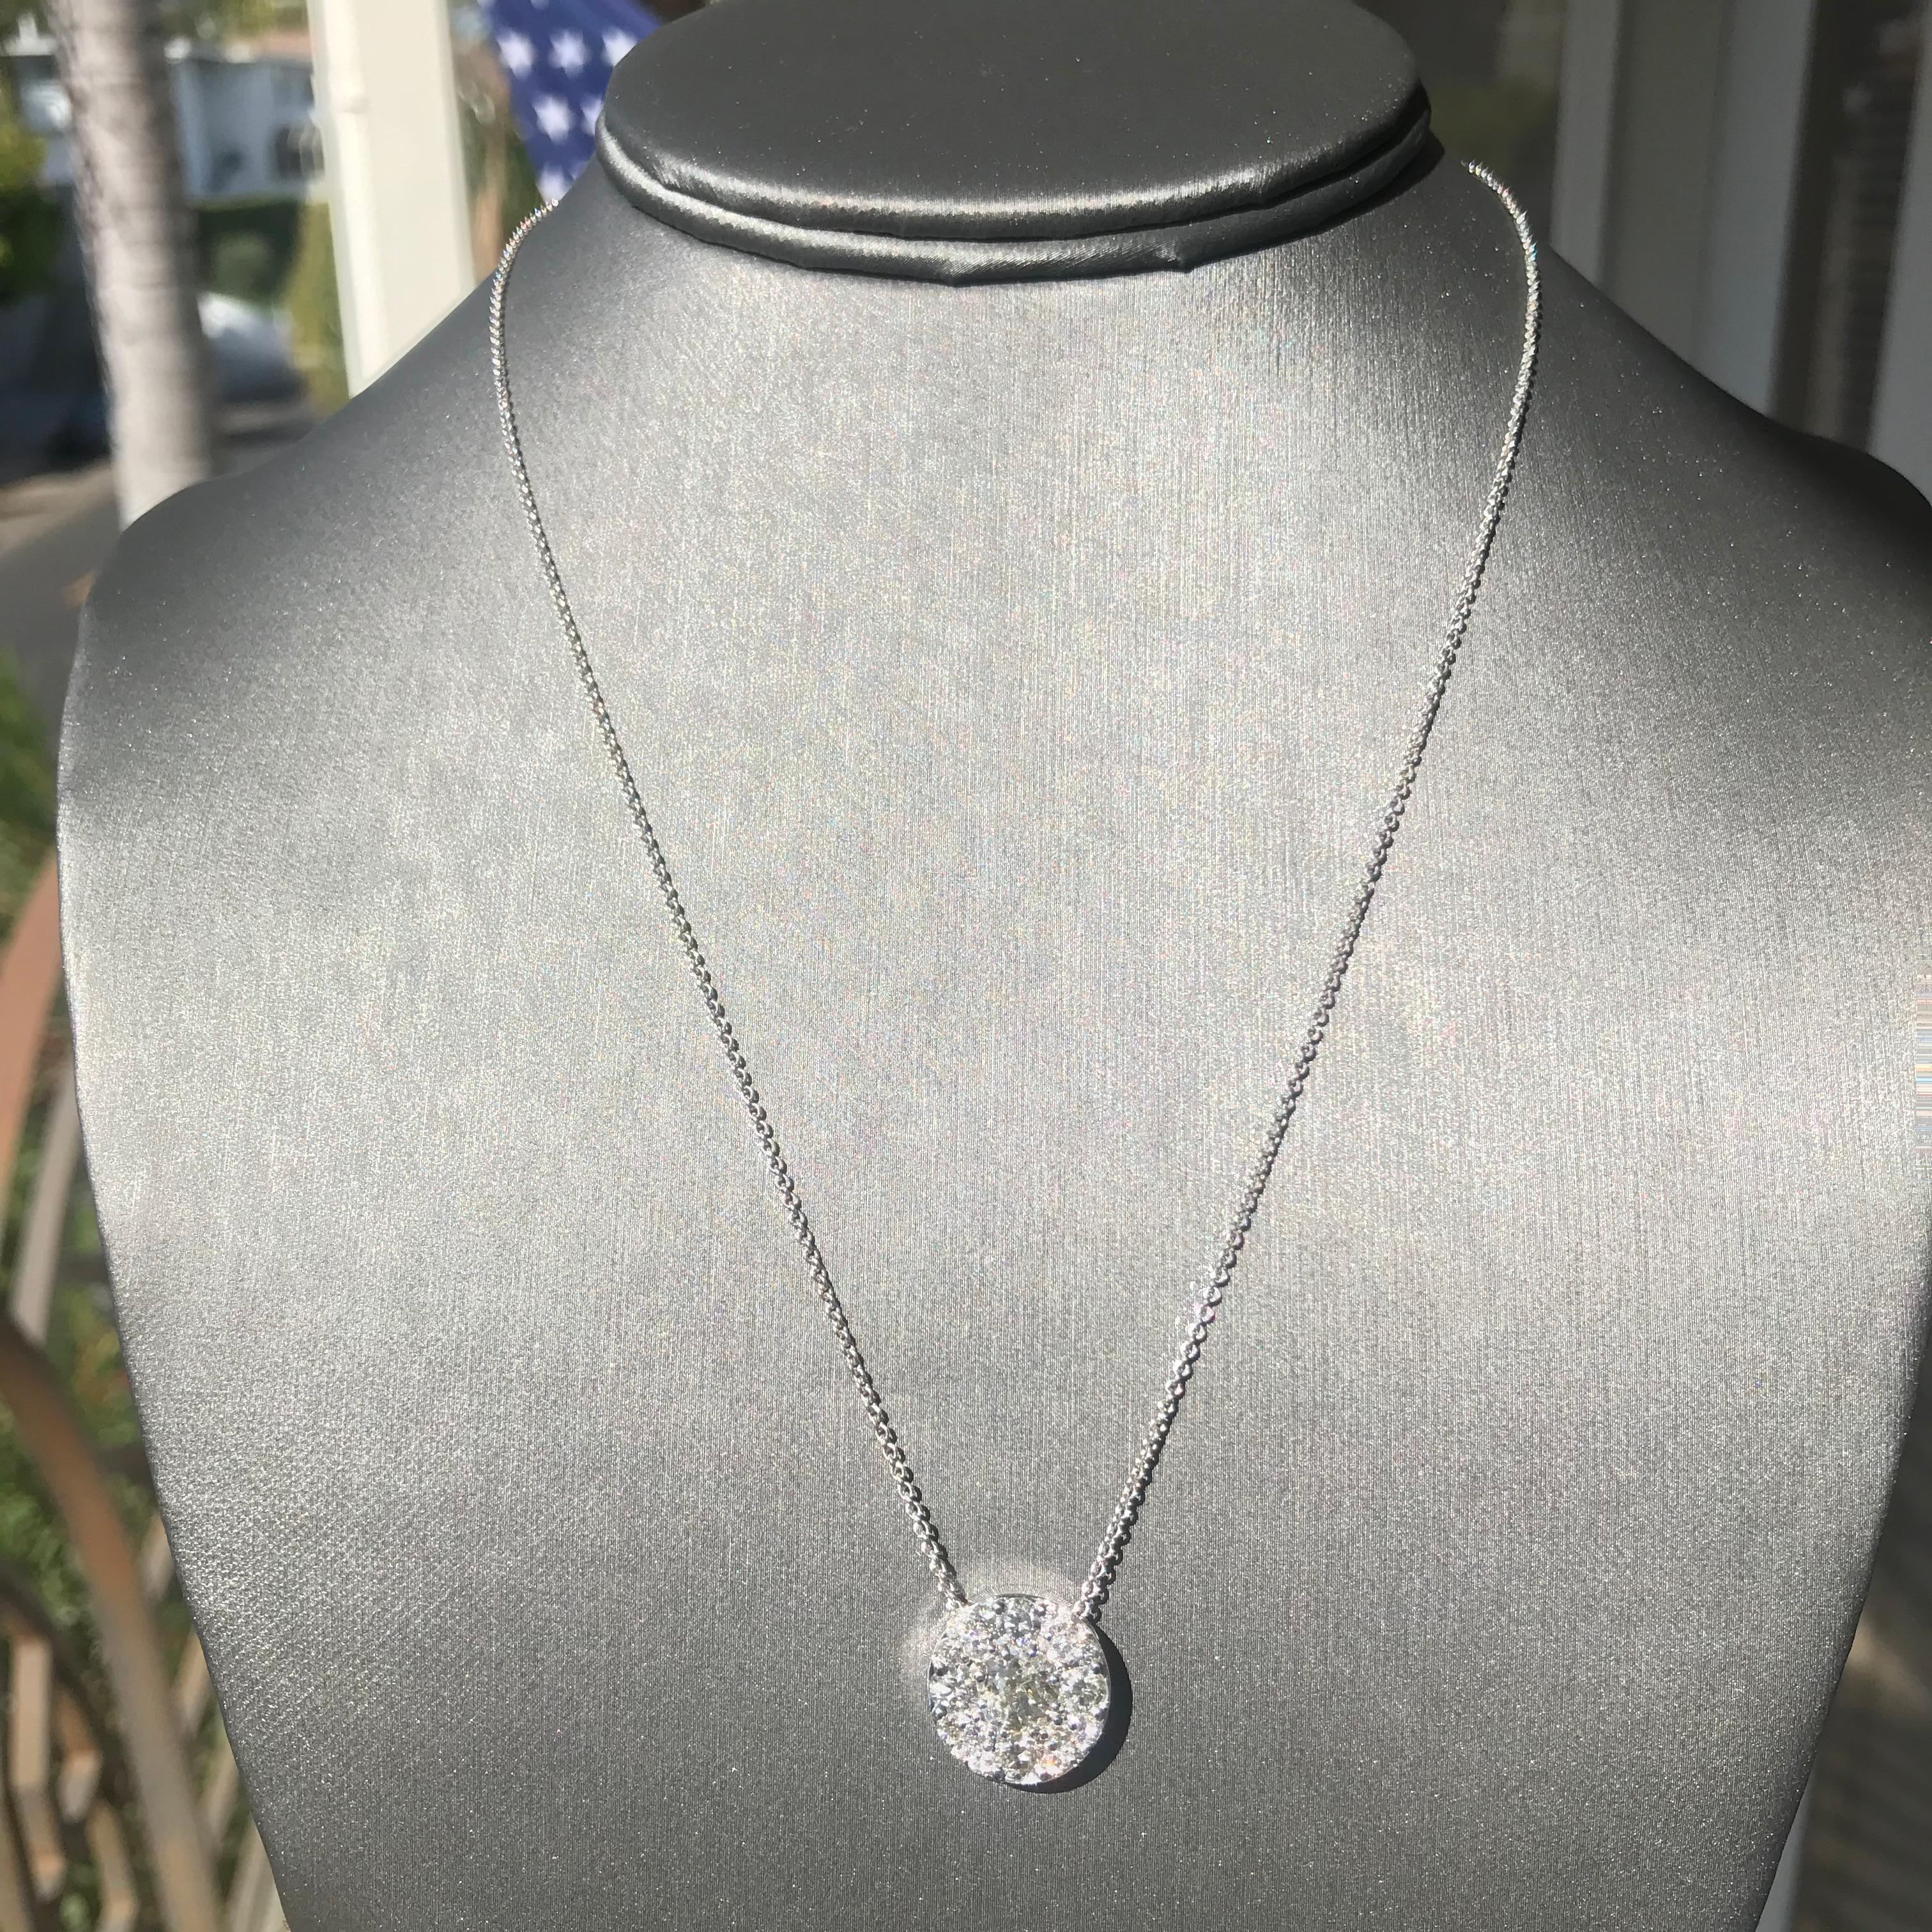 AS043-0300066
This beautiful piece is made to order, please allow 1-3 weeks from final design approval.

Pendant Info:
Metal - 14k White 
Approx 13mm Diameter

Diamond Info:
Apprx 1.15 Carats Total Weight G-H Color , VS-SI Clarity

